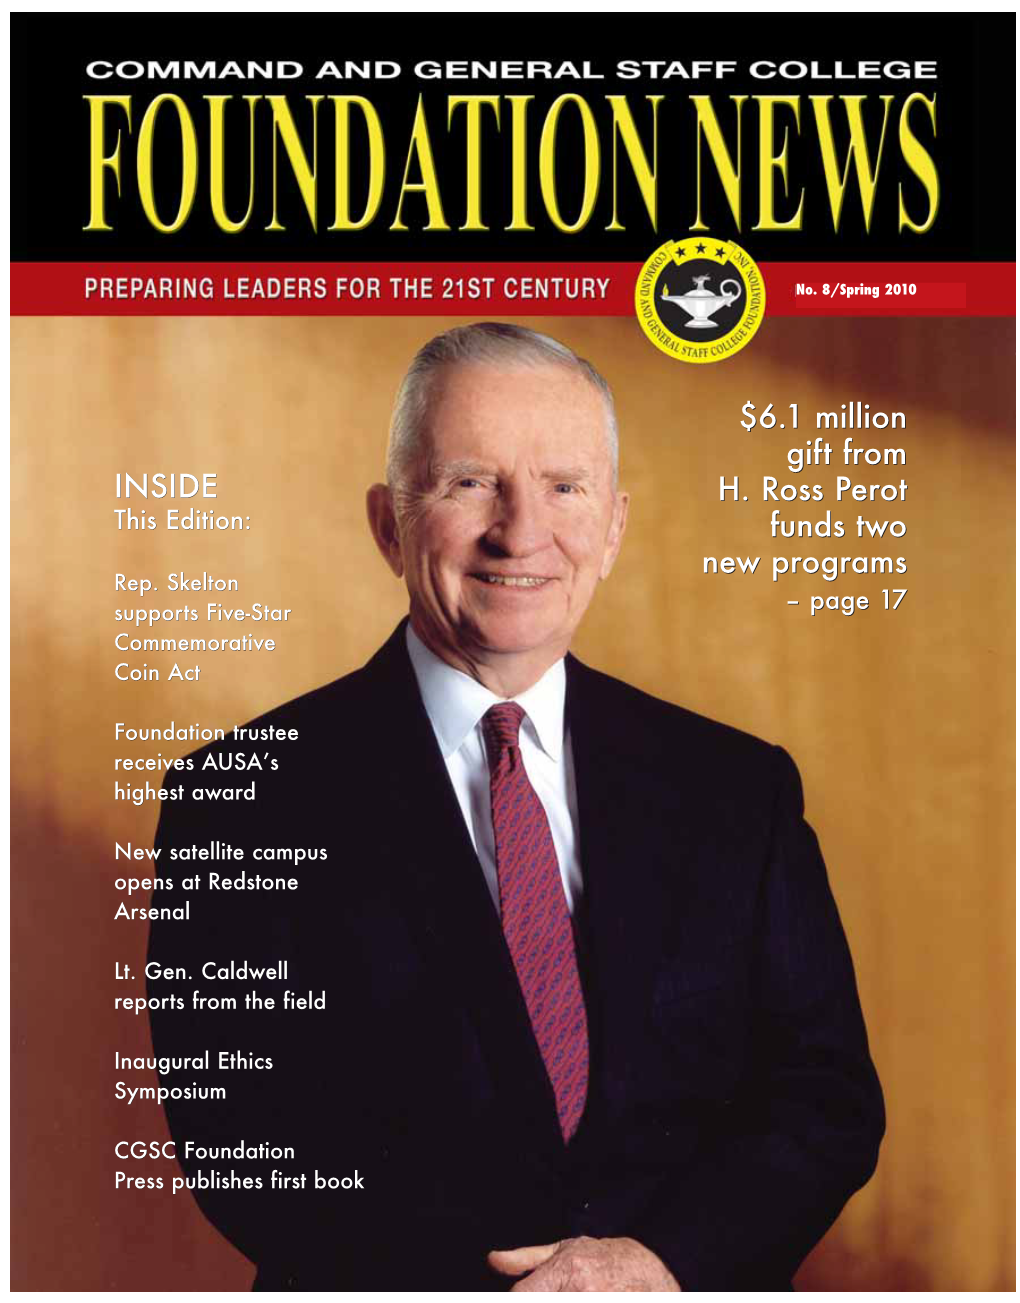 $6.1 Million Gift from H. Ross Perot Funds Two New